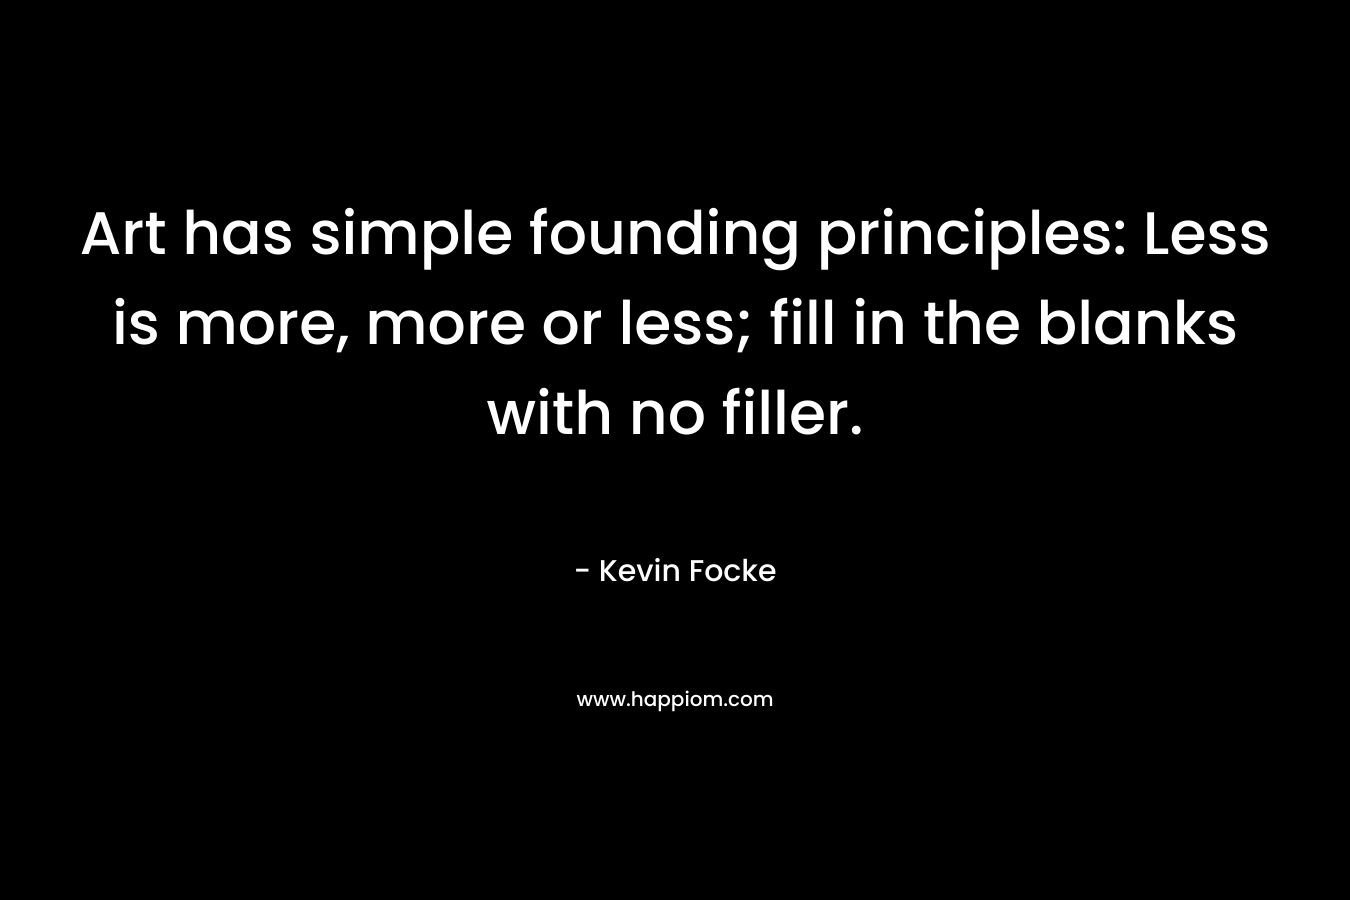 Art has simple founding principles: Less is more, more or less; fill in the blanks with no filler. – Kevin Focke